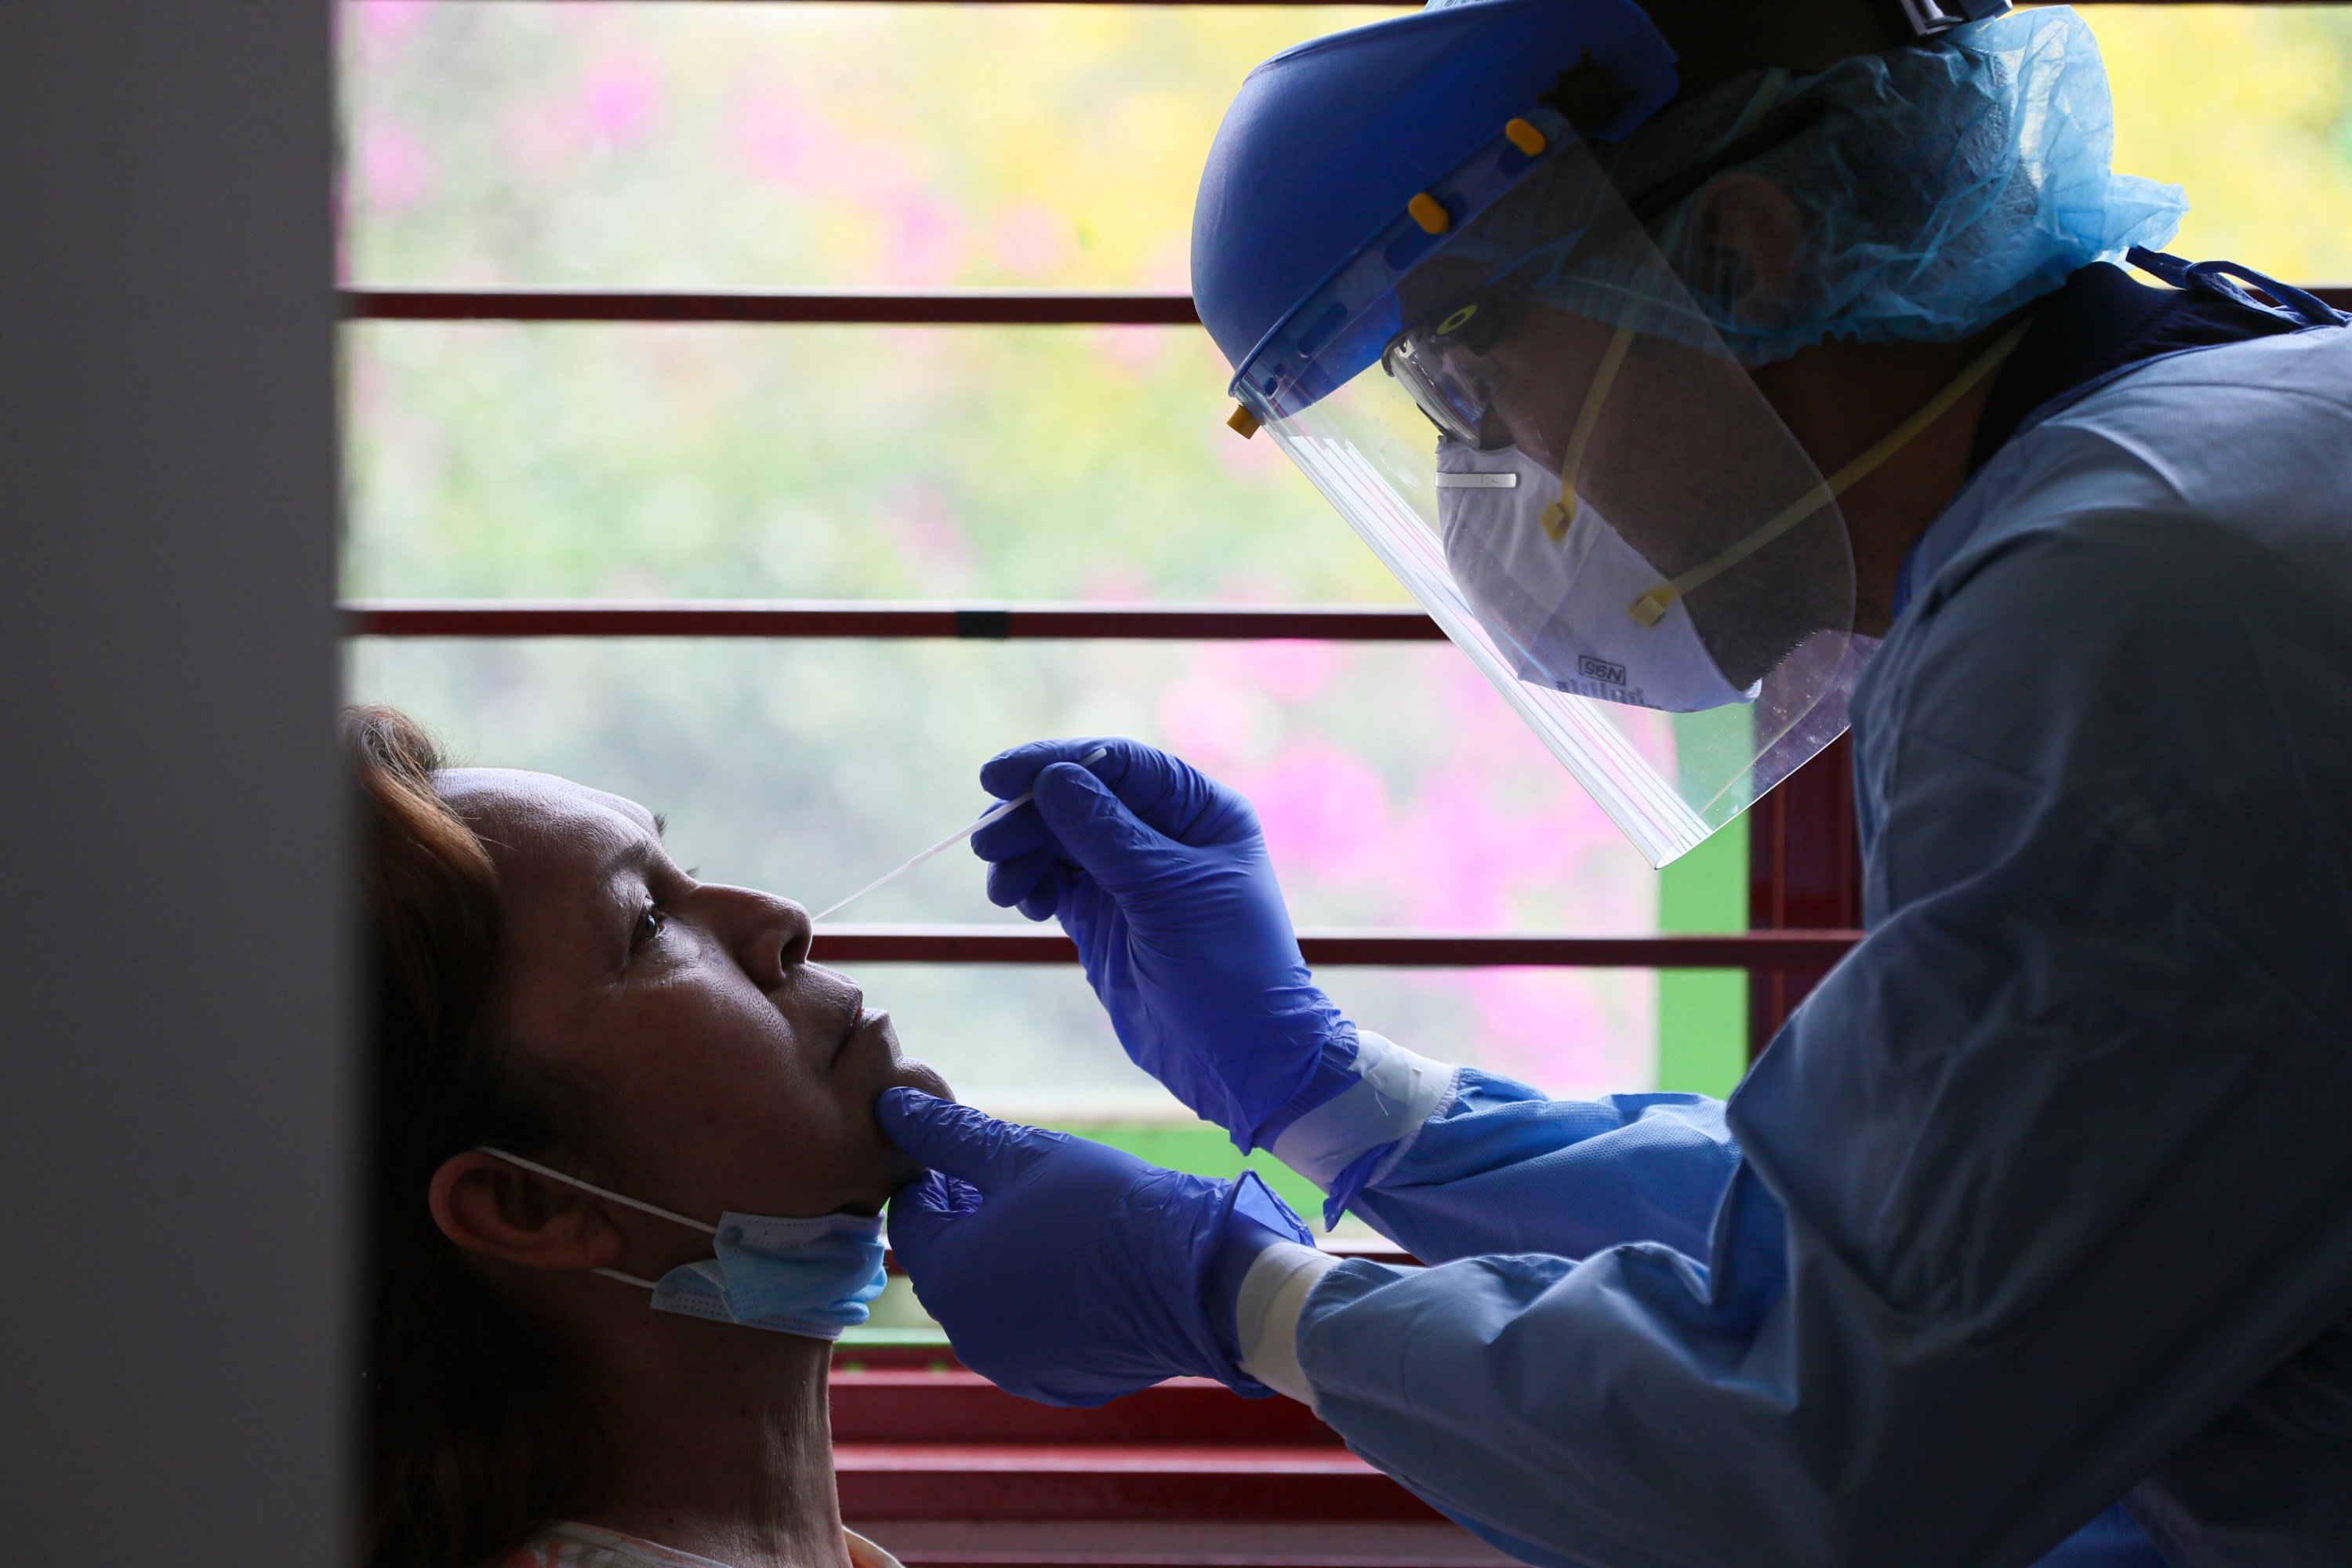 Jose Antonio Gama performs a nasal swab test on a patient at a medical center dedicated exclusively to the treatment of patients with COVID-19, in Mexico City, Saturday, May 9, 2020. (AP Photo)